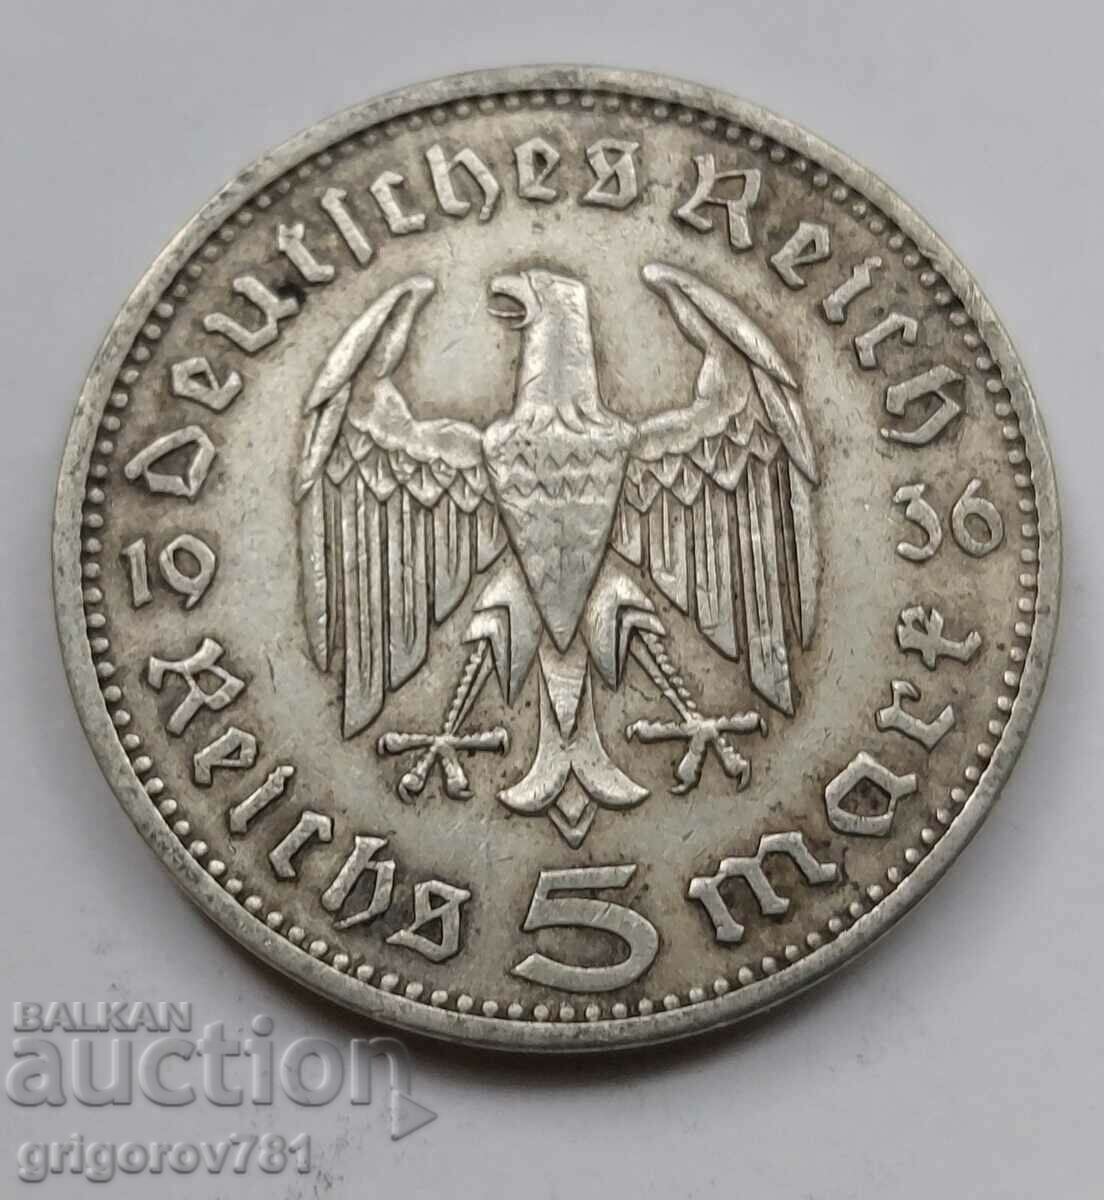 5 Mark Silver Germany 1936 A III Reich Silver Coin #49